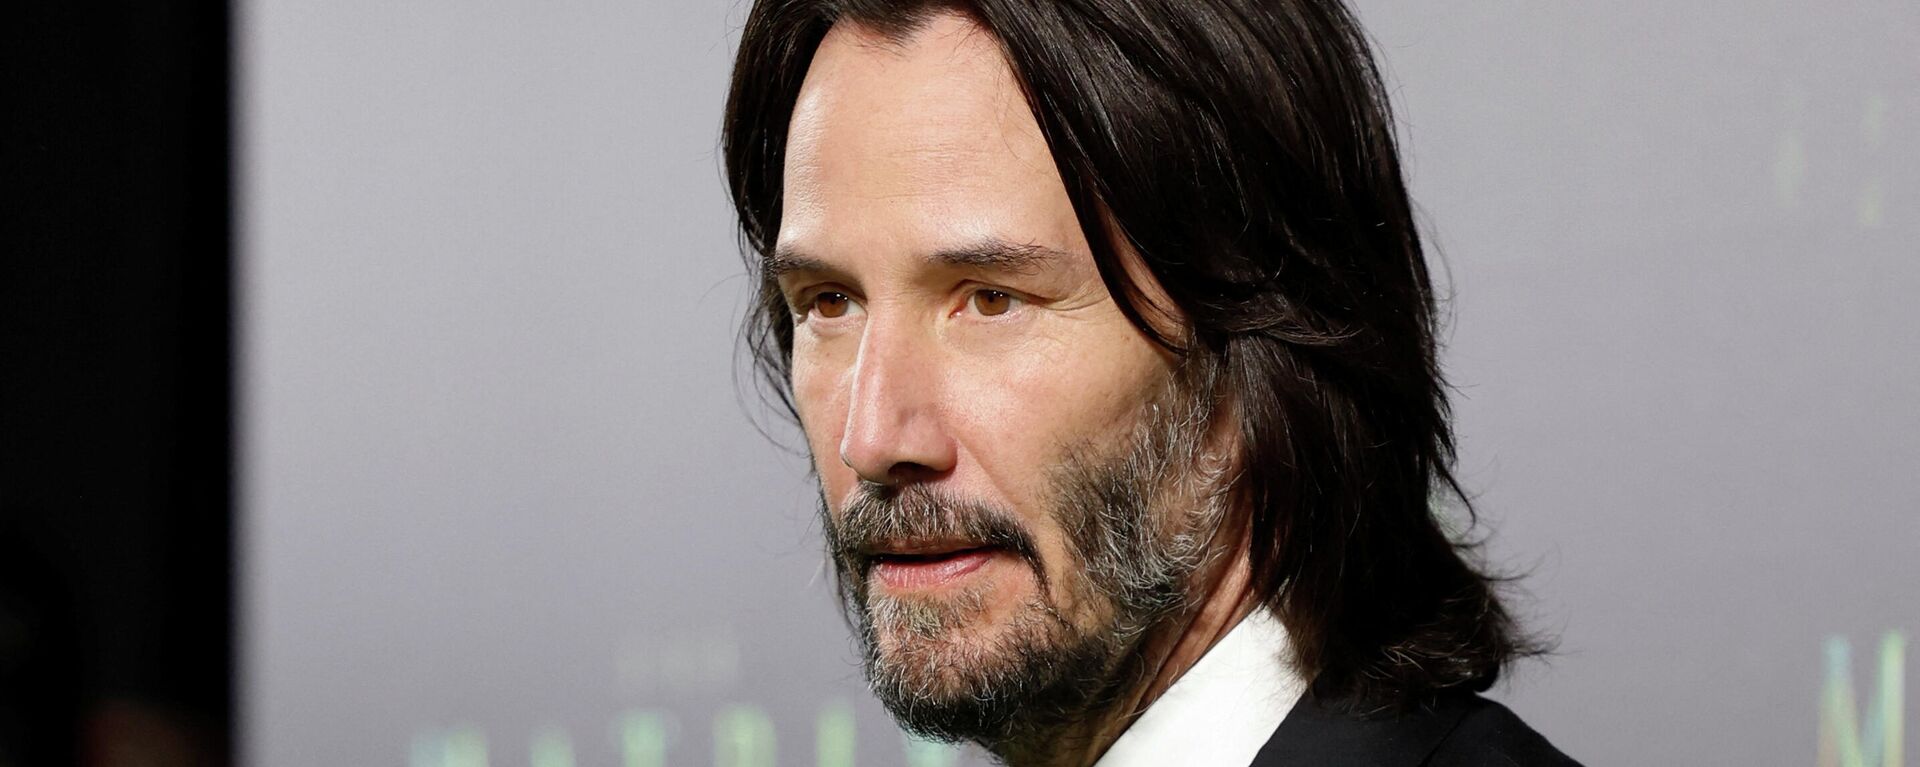 Actor Keanu Reeves poses on the red carpet at the premiere of The Matrix Resurrections in San Francisco, California, U.S. - Sputnik International, 1920, 04.01.2022